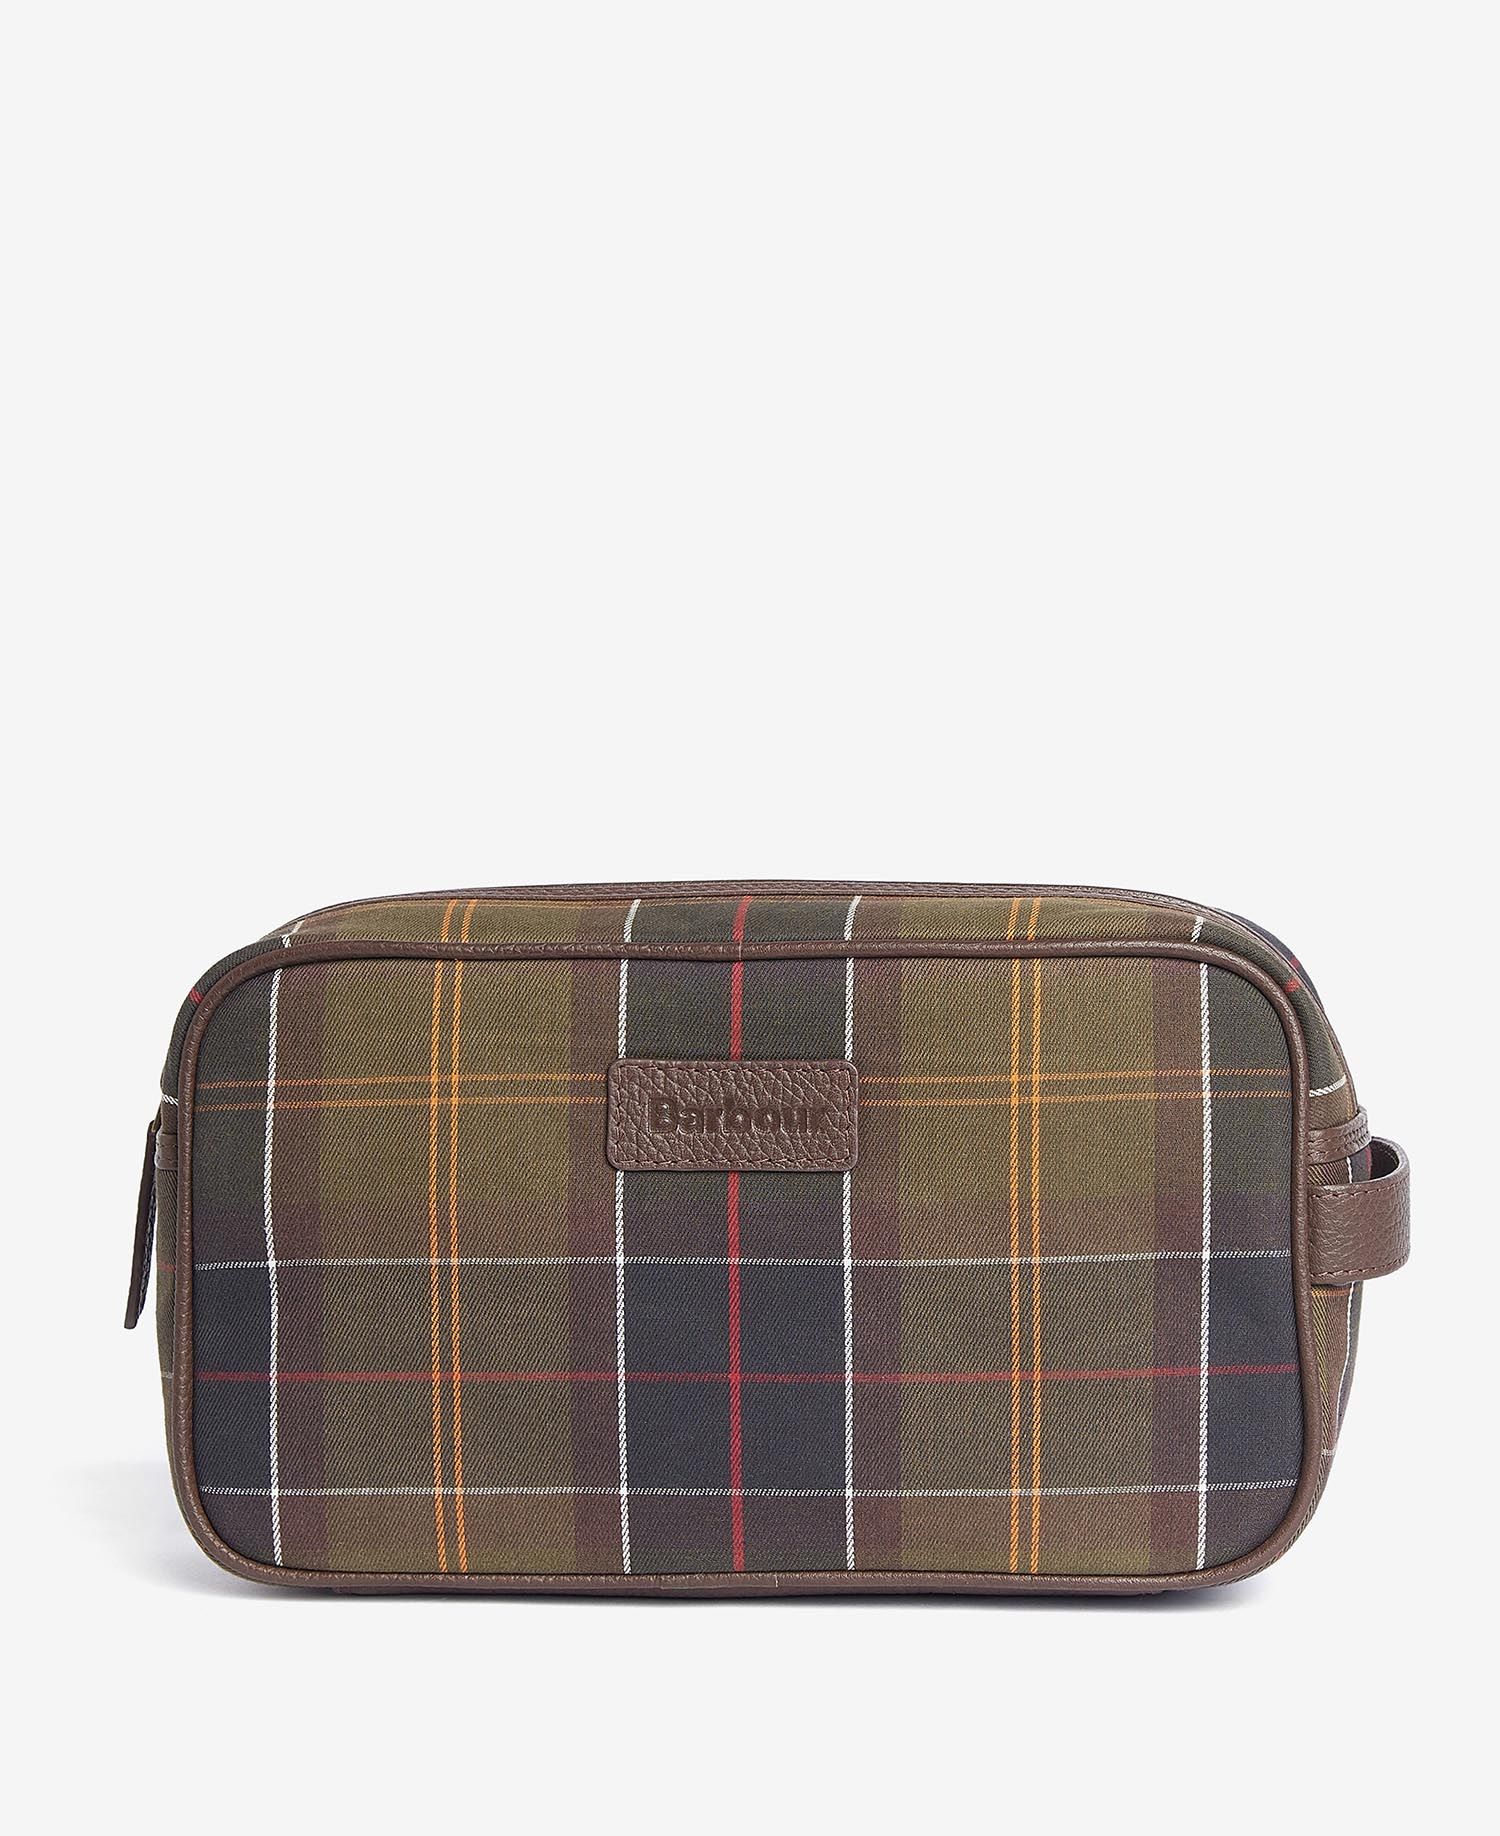 Barbour Tartan and Leather Wash Bag